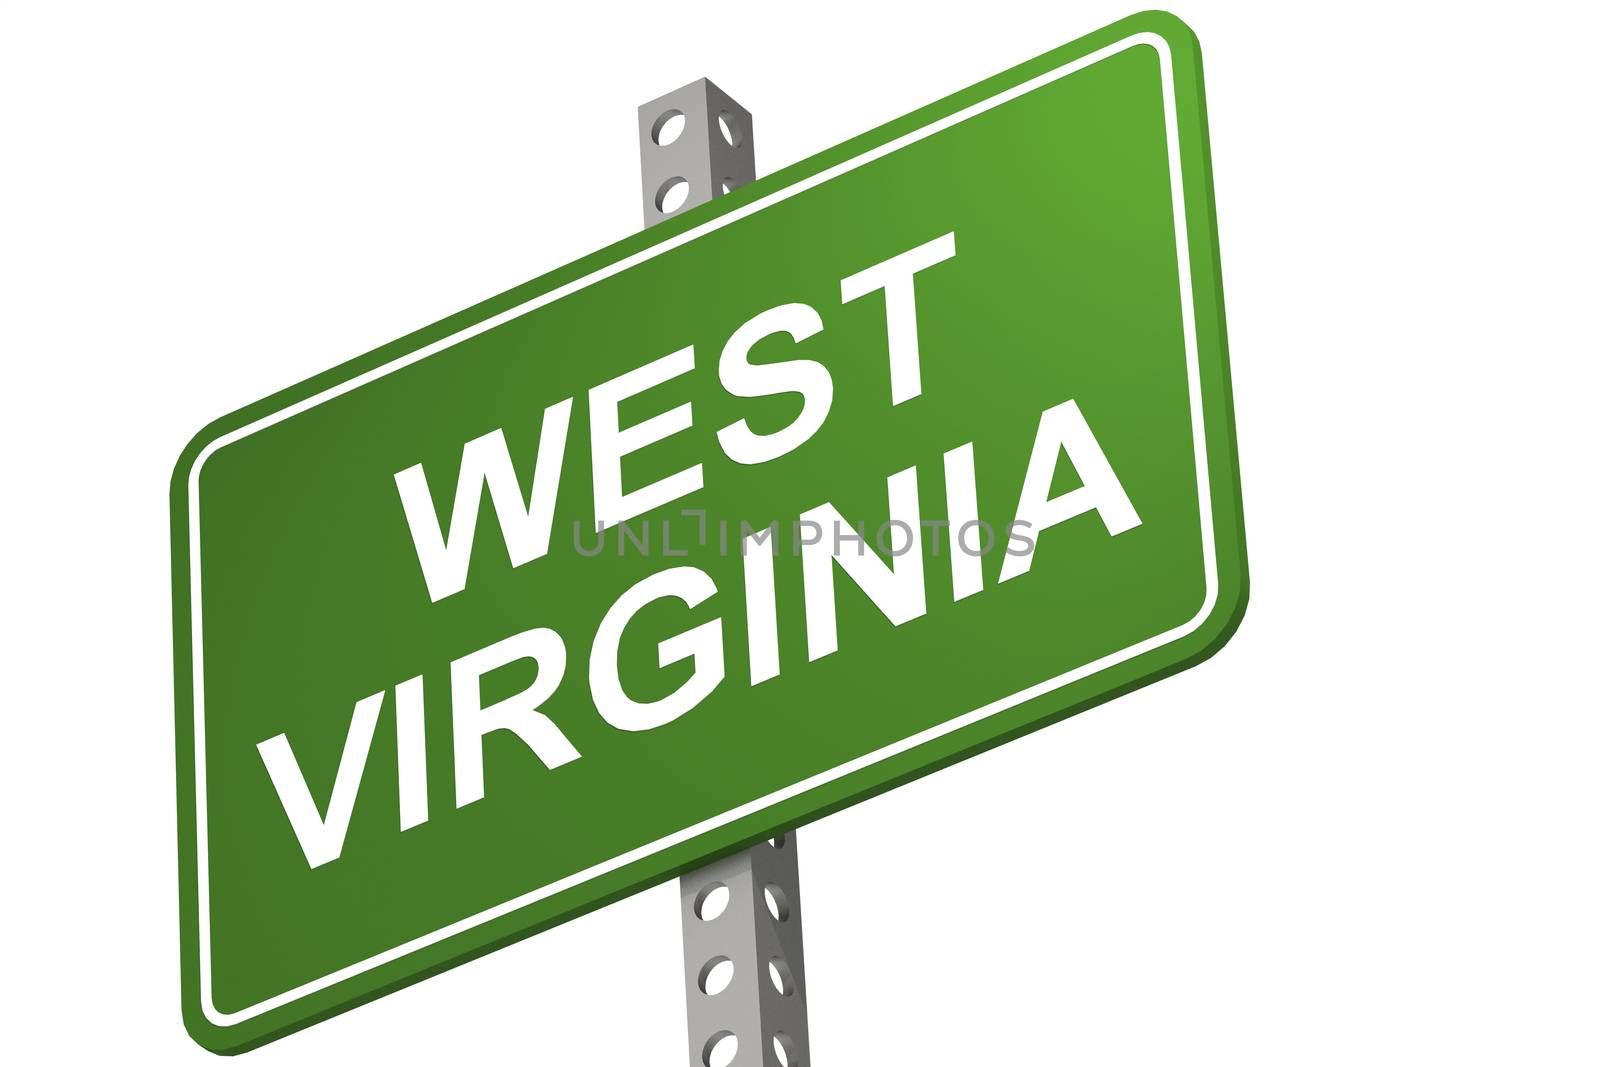 West virginia road sign on white background by tang90246